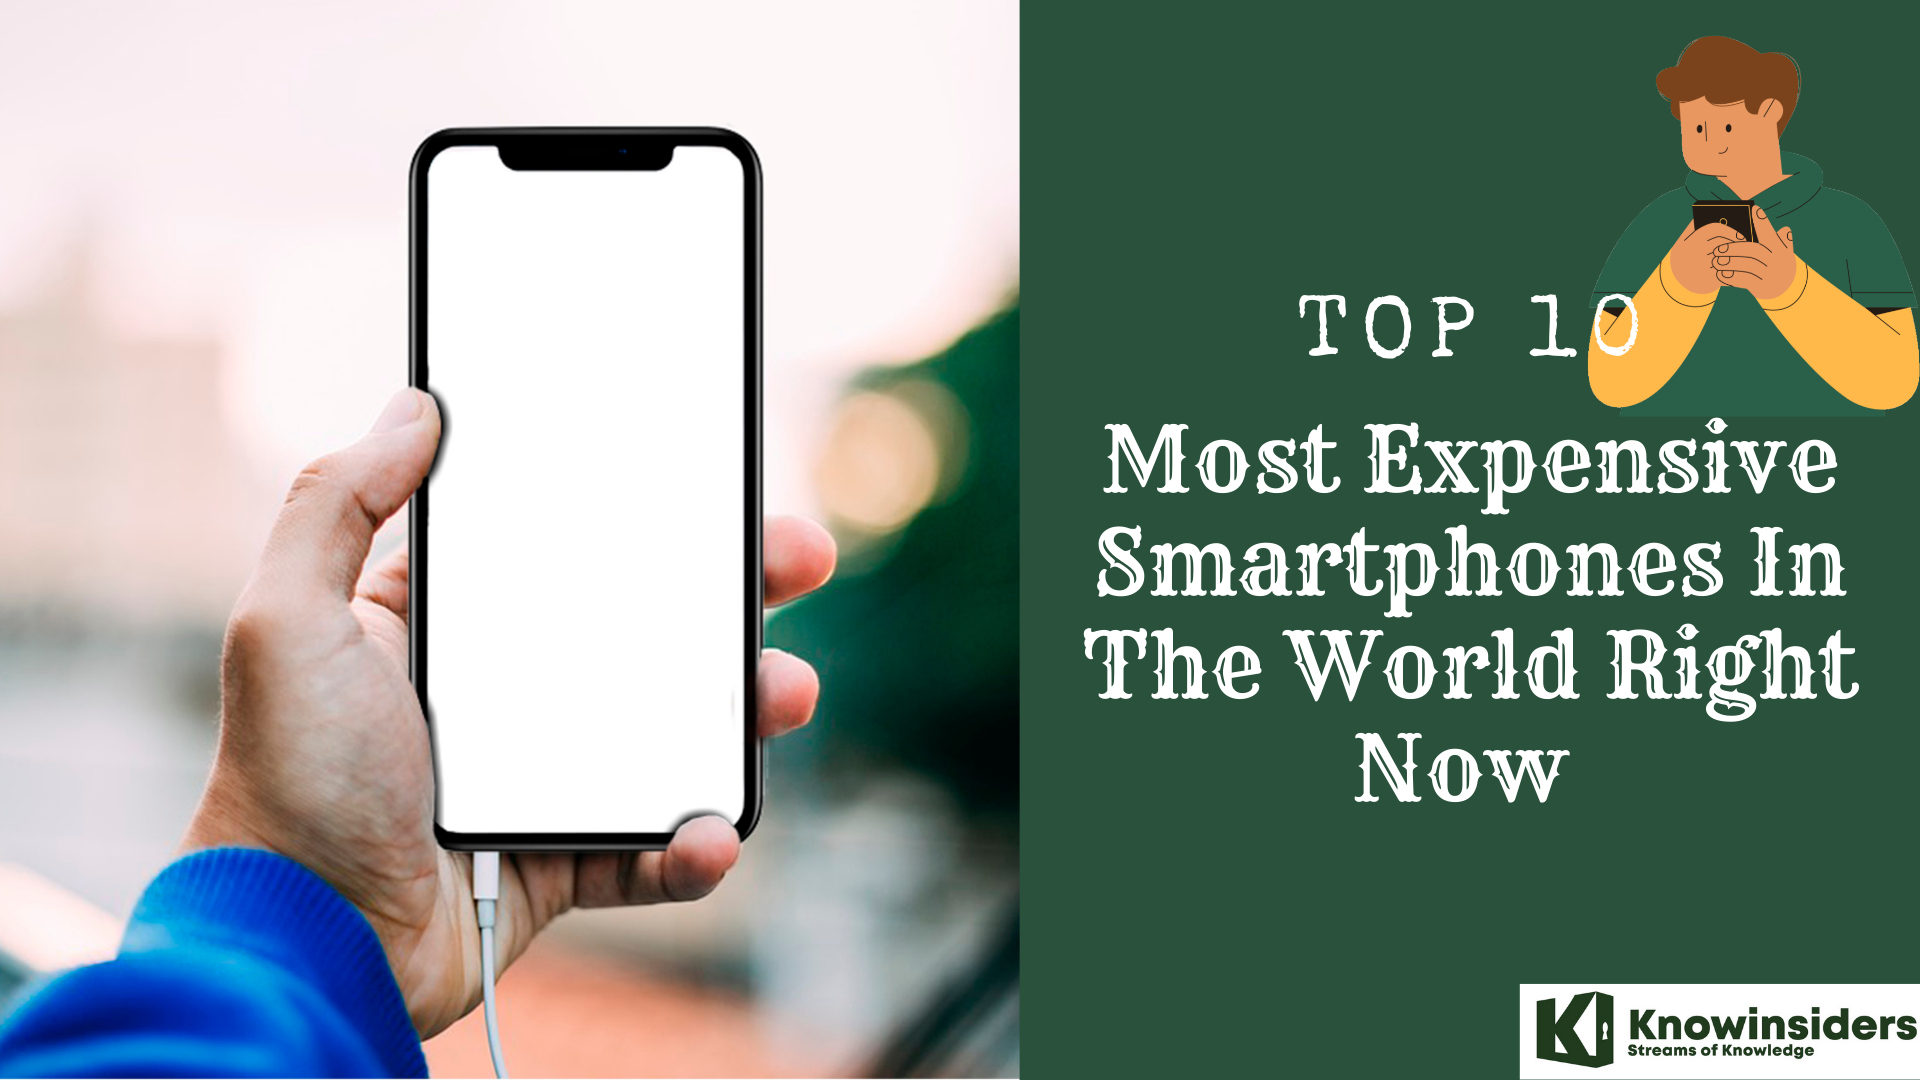 Top 10 Most Expensive Smartphones In The World Right Now